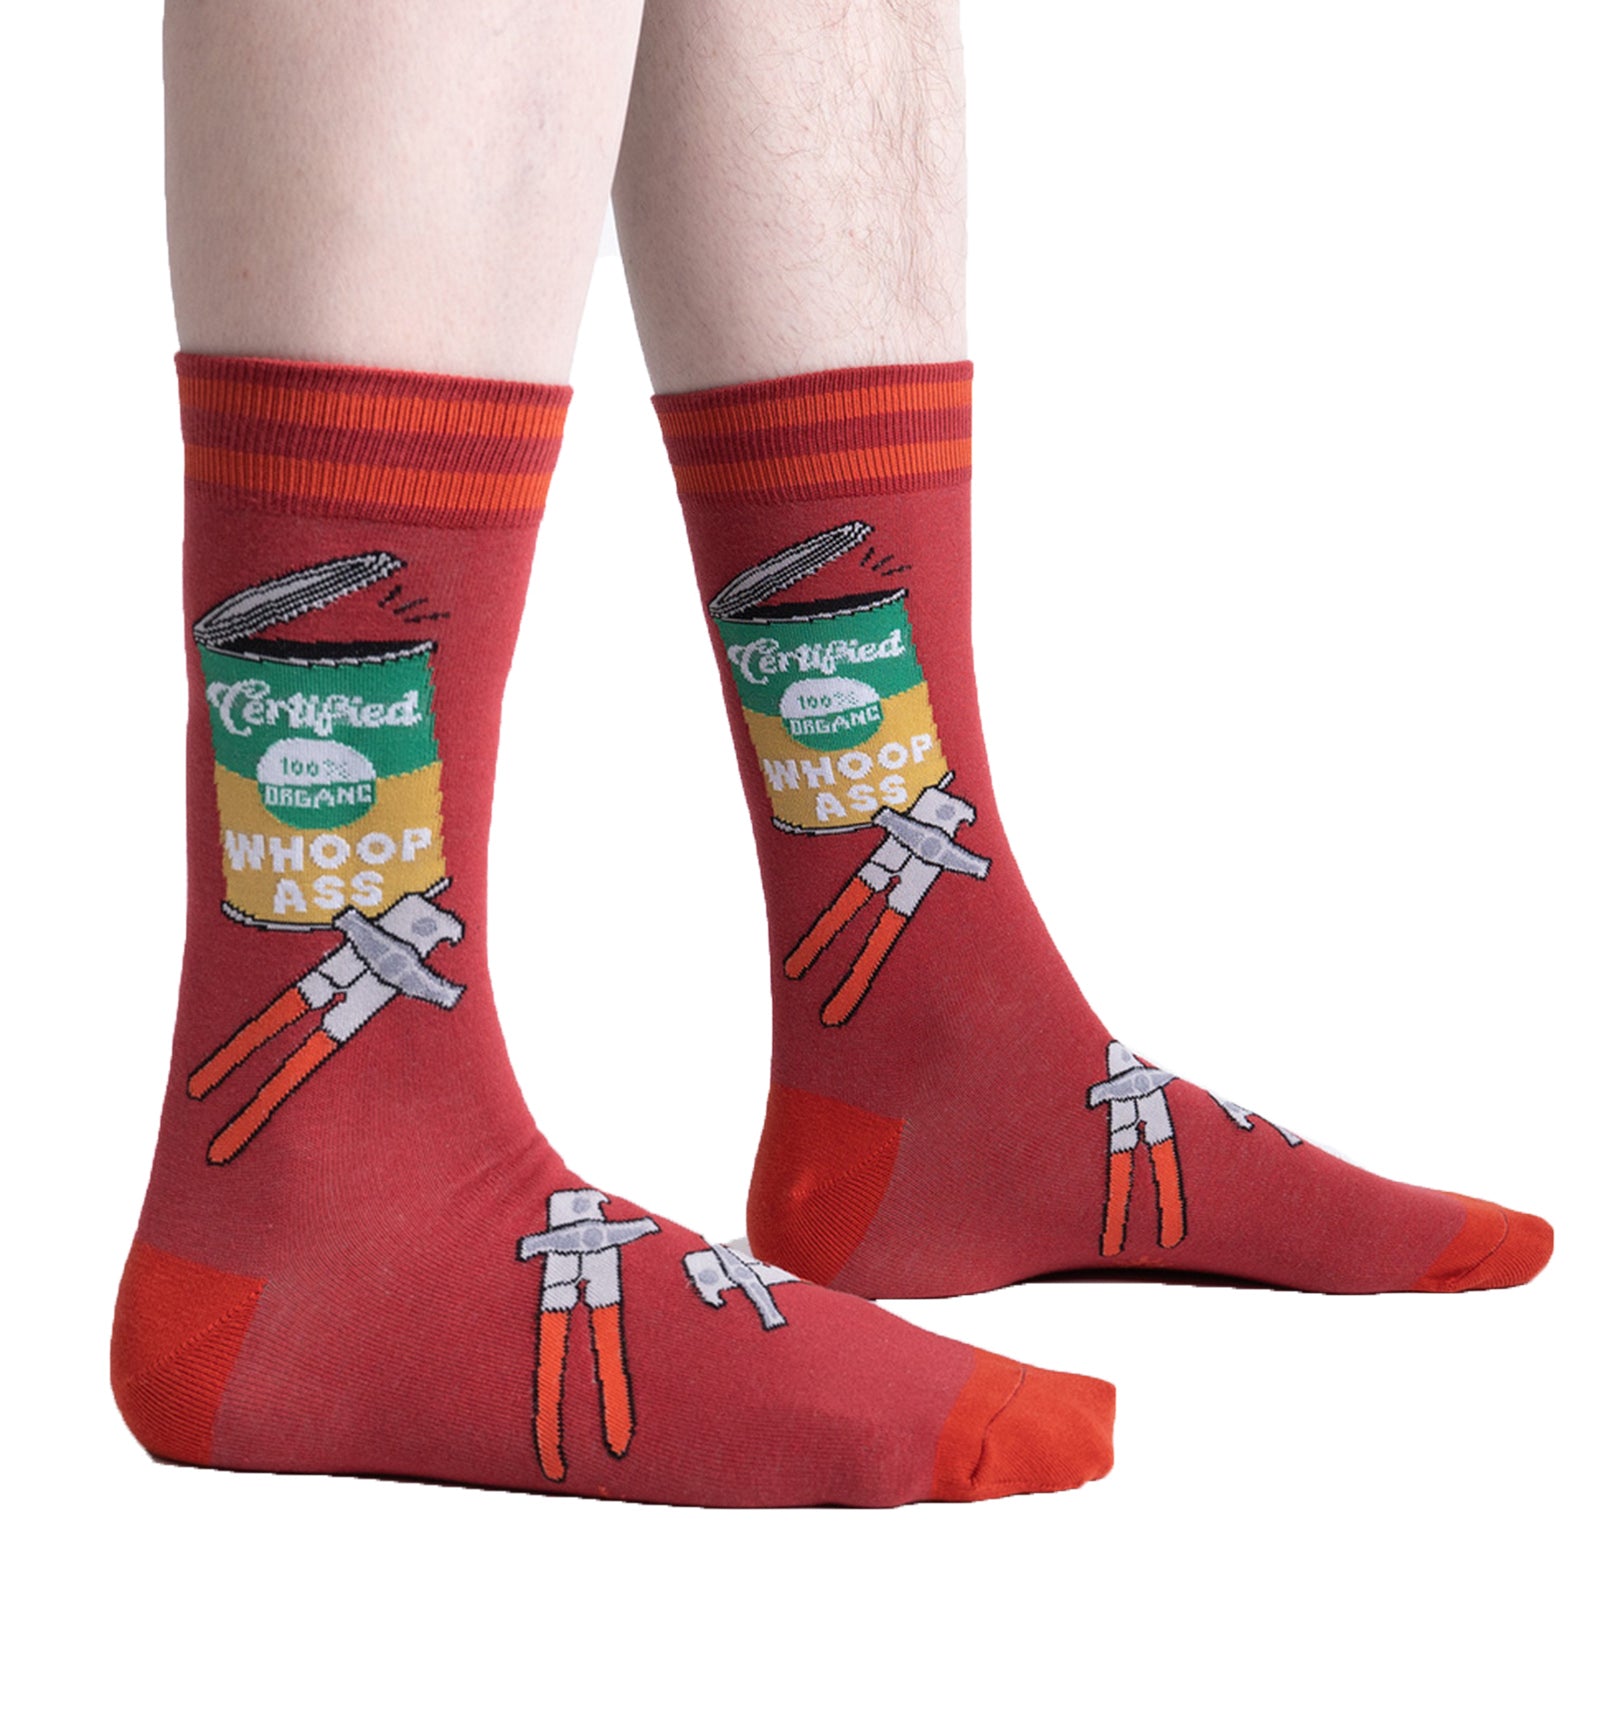 SOCK it to me Men's Crew Socks (MEF0627),Opening Up A Can - Opening Up A Can,One Size